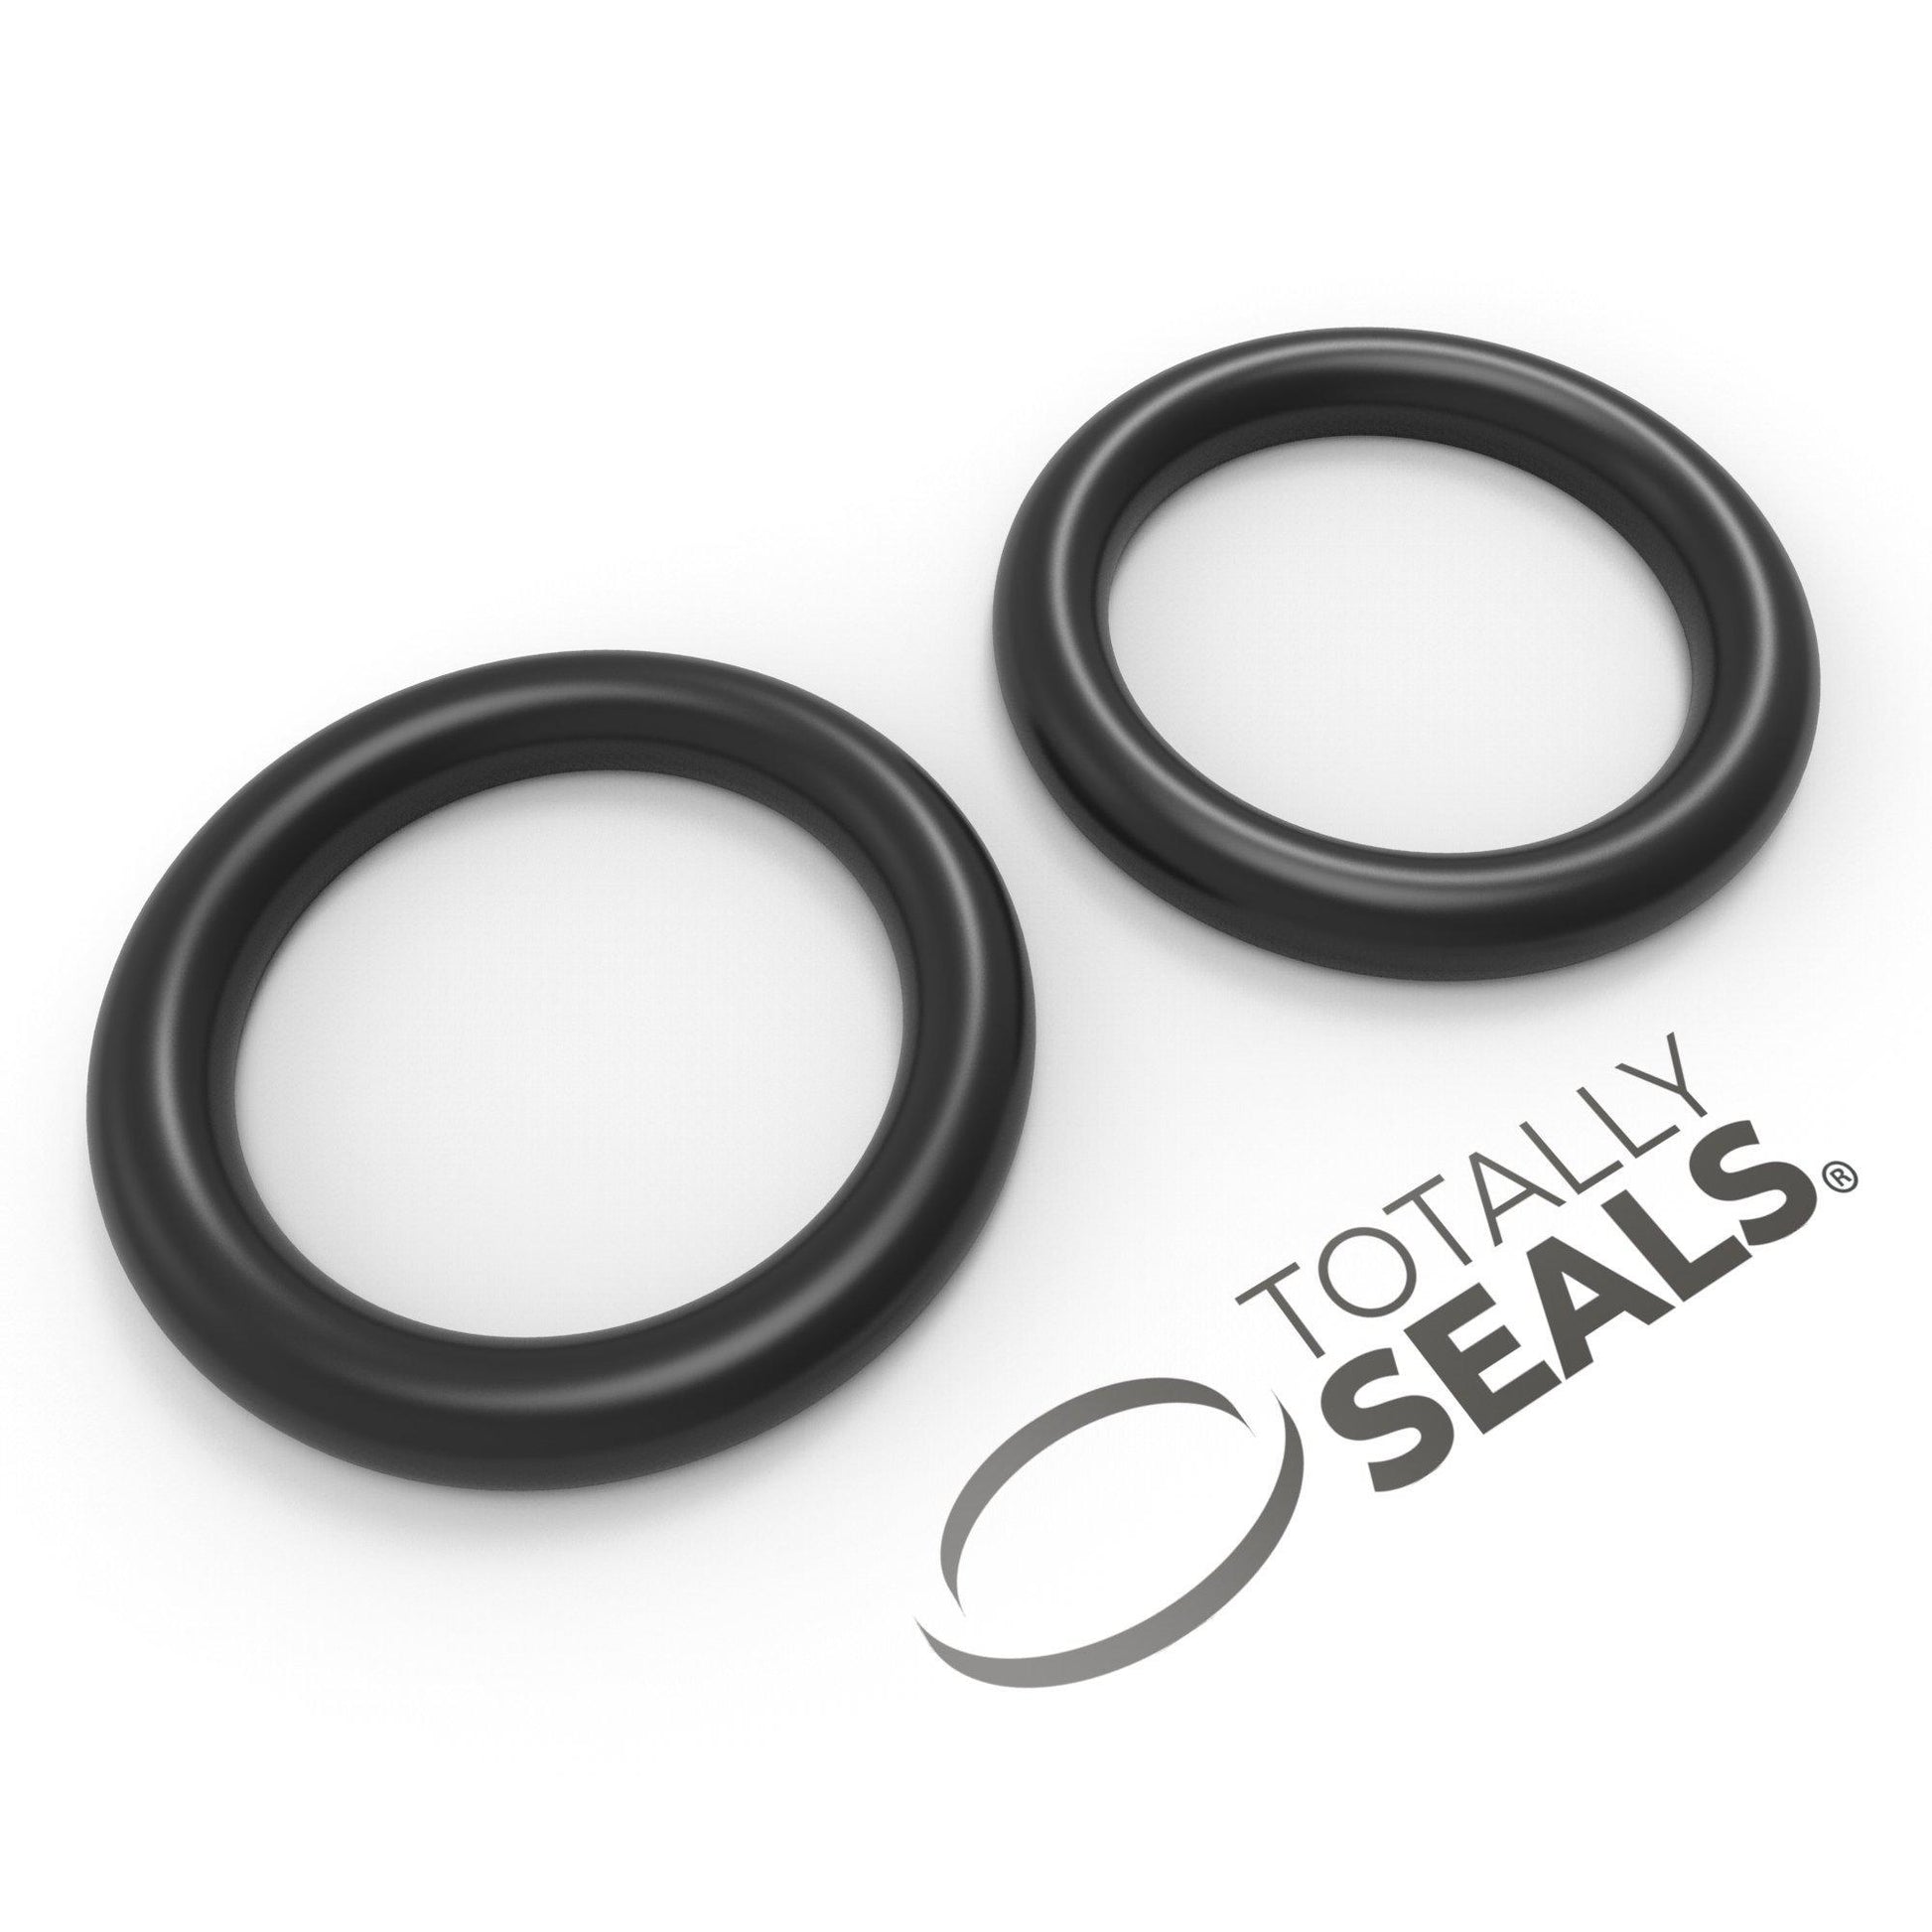 24mm x 1mm (26mm OD) Nitrile O-Rings - Totally Seals®